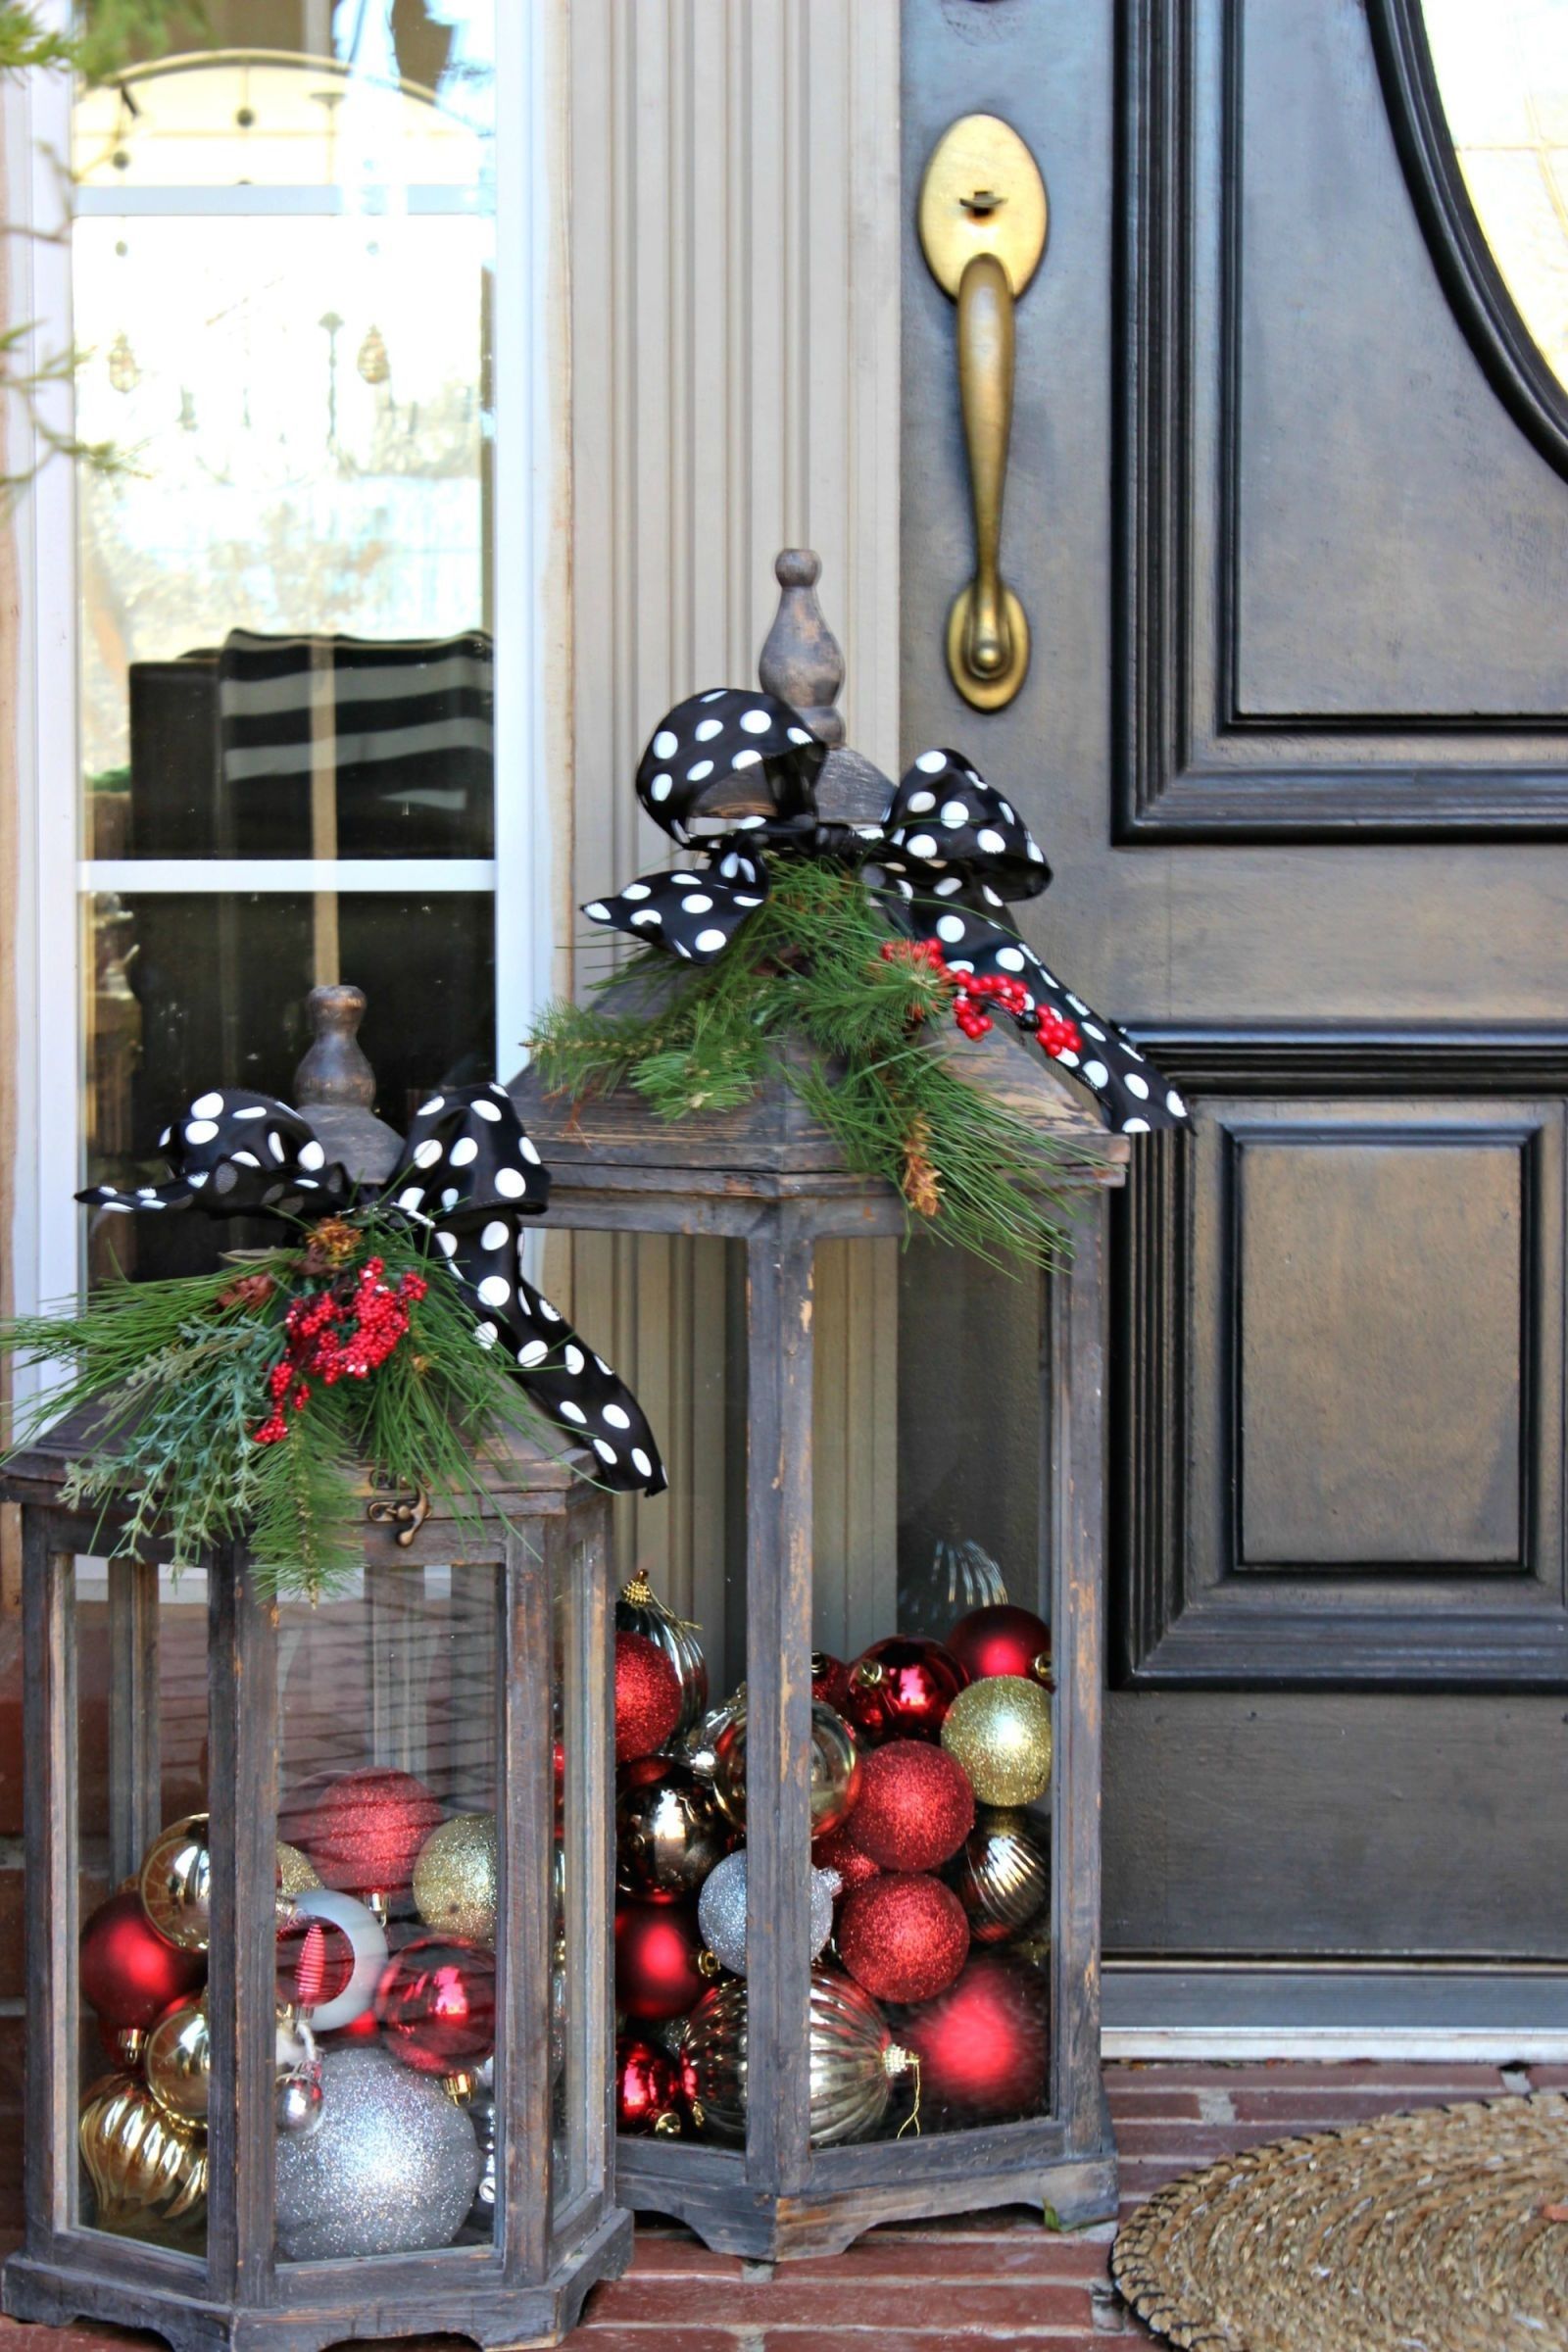 13 Outdoor Christmas Decorations That Are Simply Magical | ✻ Diy Intended For Outdoor Holiday Lanterns (View 4 of 20)